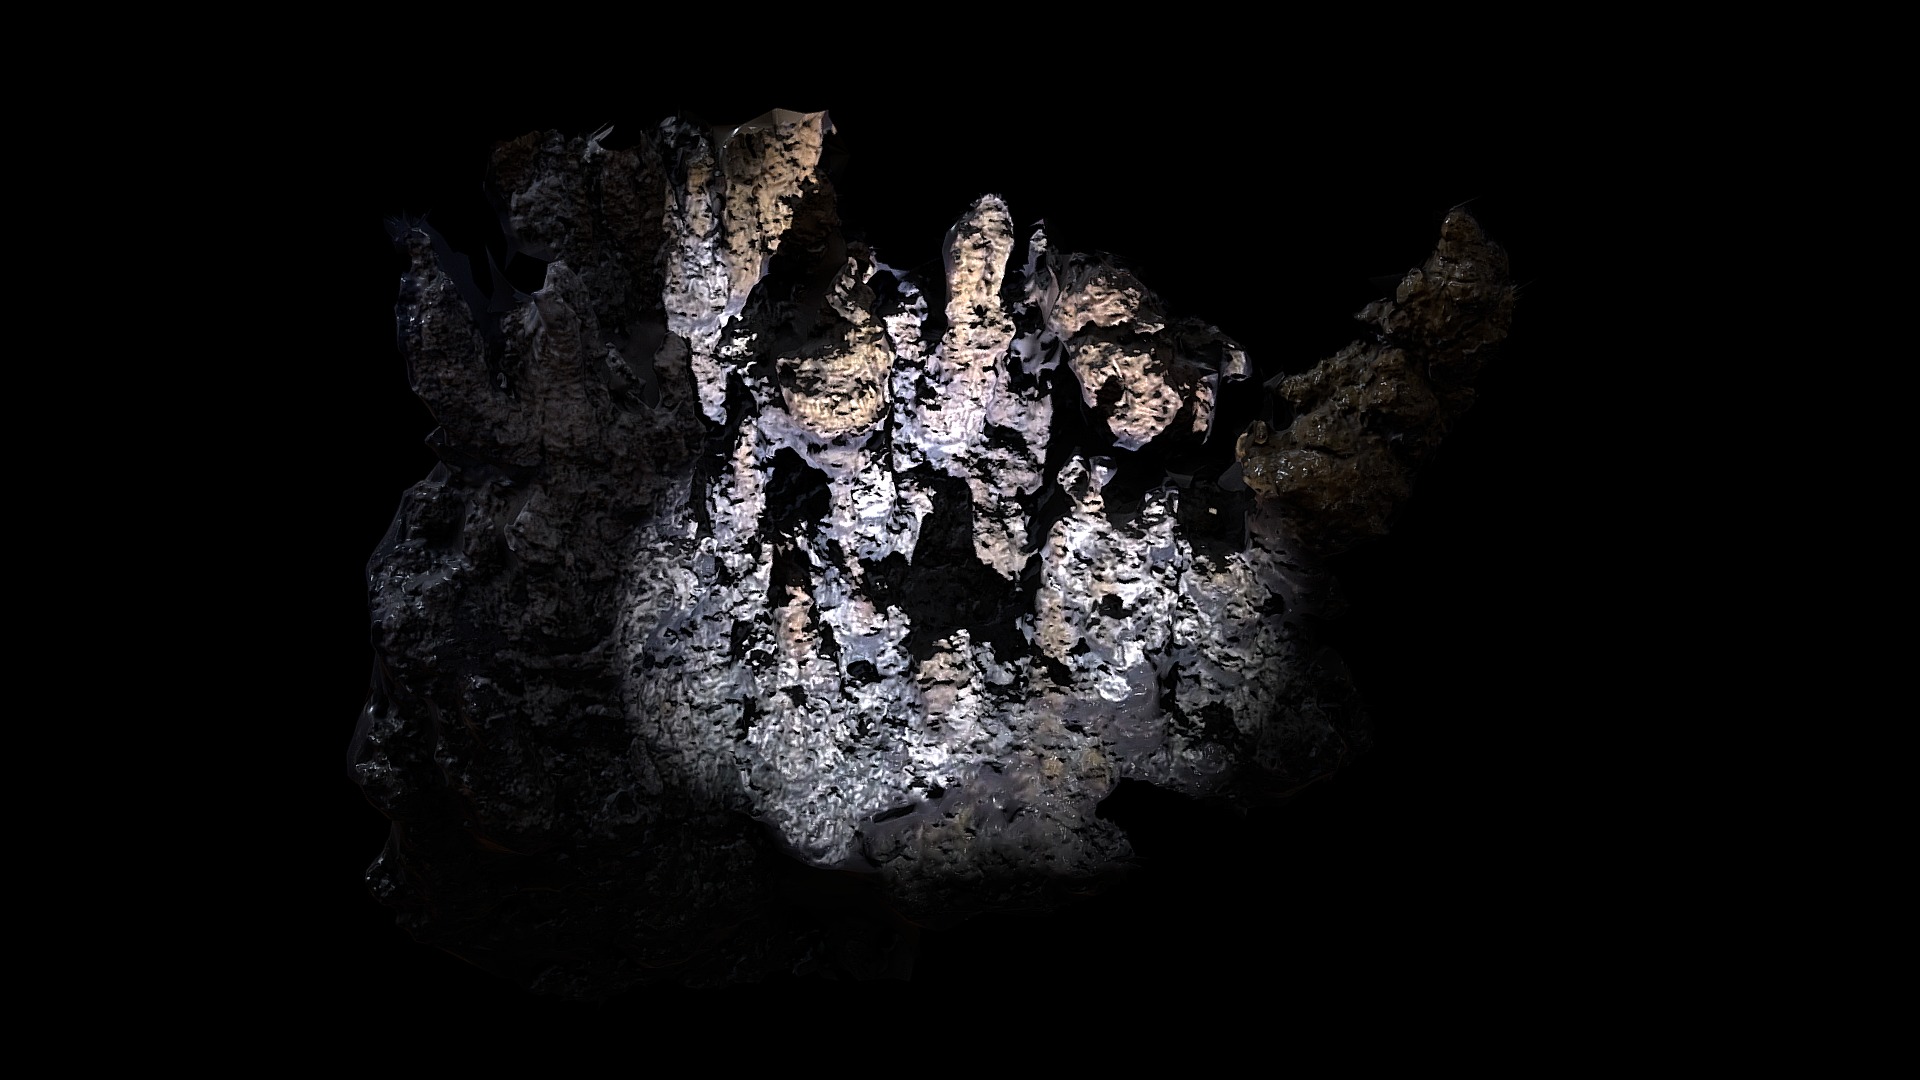 3D model Low Poly Deep Sea Hydrothermal Vent #6 - This is a 3D model of the Low Poly Deep Sea Hydrothermal Vent #6. The 3D model is about a close-up of a rock.